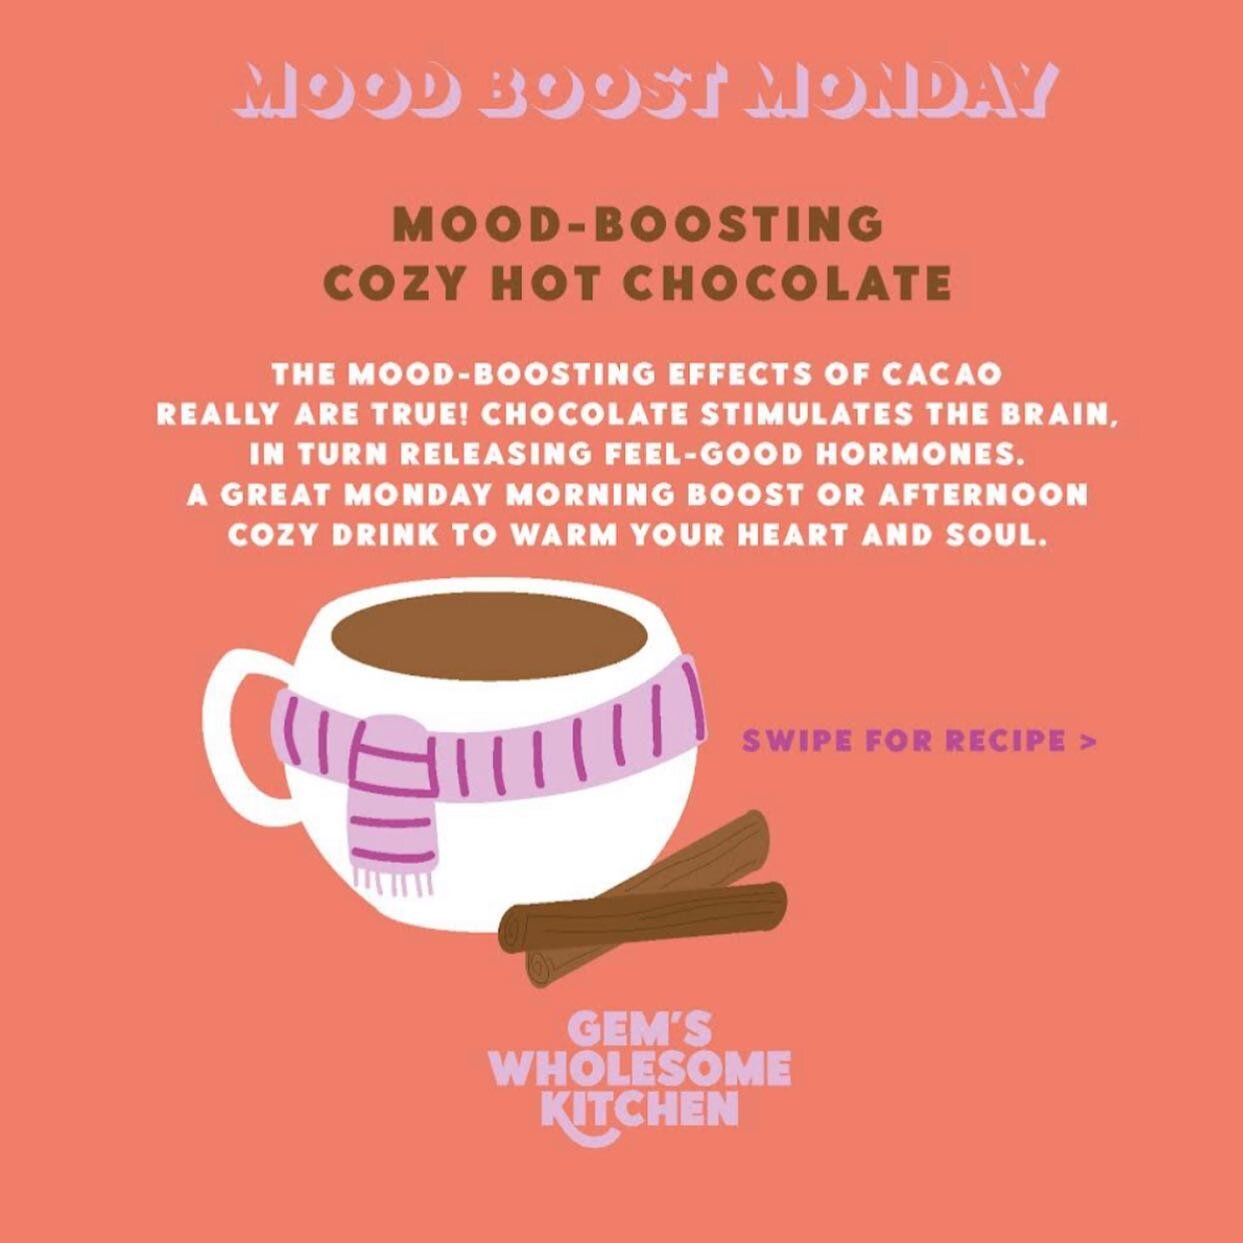 Mood Boost Monday 
.
.
.
Perfect weather for my cozy + mood boosting hot chocolate.(It's grim out there )
.
The mood-boosting effects of cacao
really are true! Chocolate stimulates the brain, in turn releasing feel-good hormones.
A great Monday morni